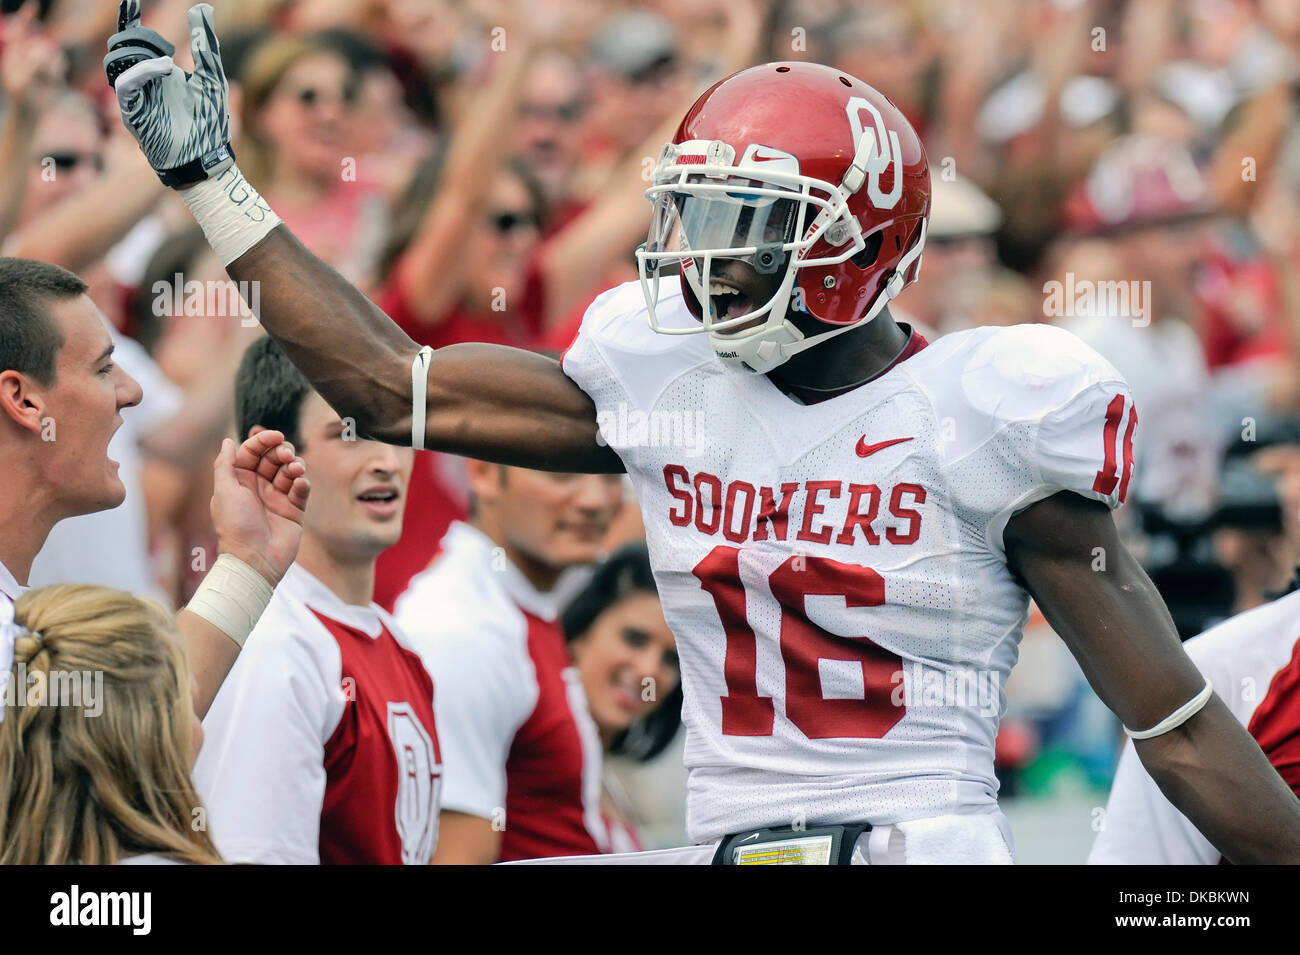 Oct. 8, 2011 - Dallas, Texas, U.S - Oklahoma Sooners wide receiver Jaz Reynolds (16) points to the crowd after making the reception during game action of the Red River Rivalry between the #3 Oklahoma Sooners and #11 Texas Longhorns at Cotton Bowl in Dallas, Texas.  Oklahoma routes Texas 55-17. (Credit Image: © Steven Leija/Southcreek/ZUMAPRESS.com) Stock Photo